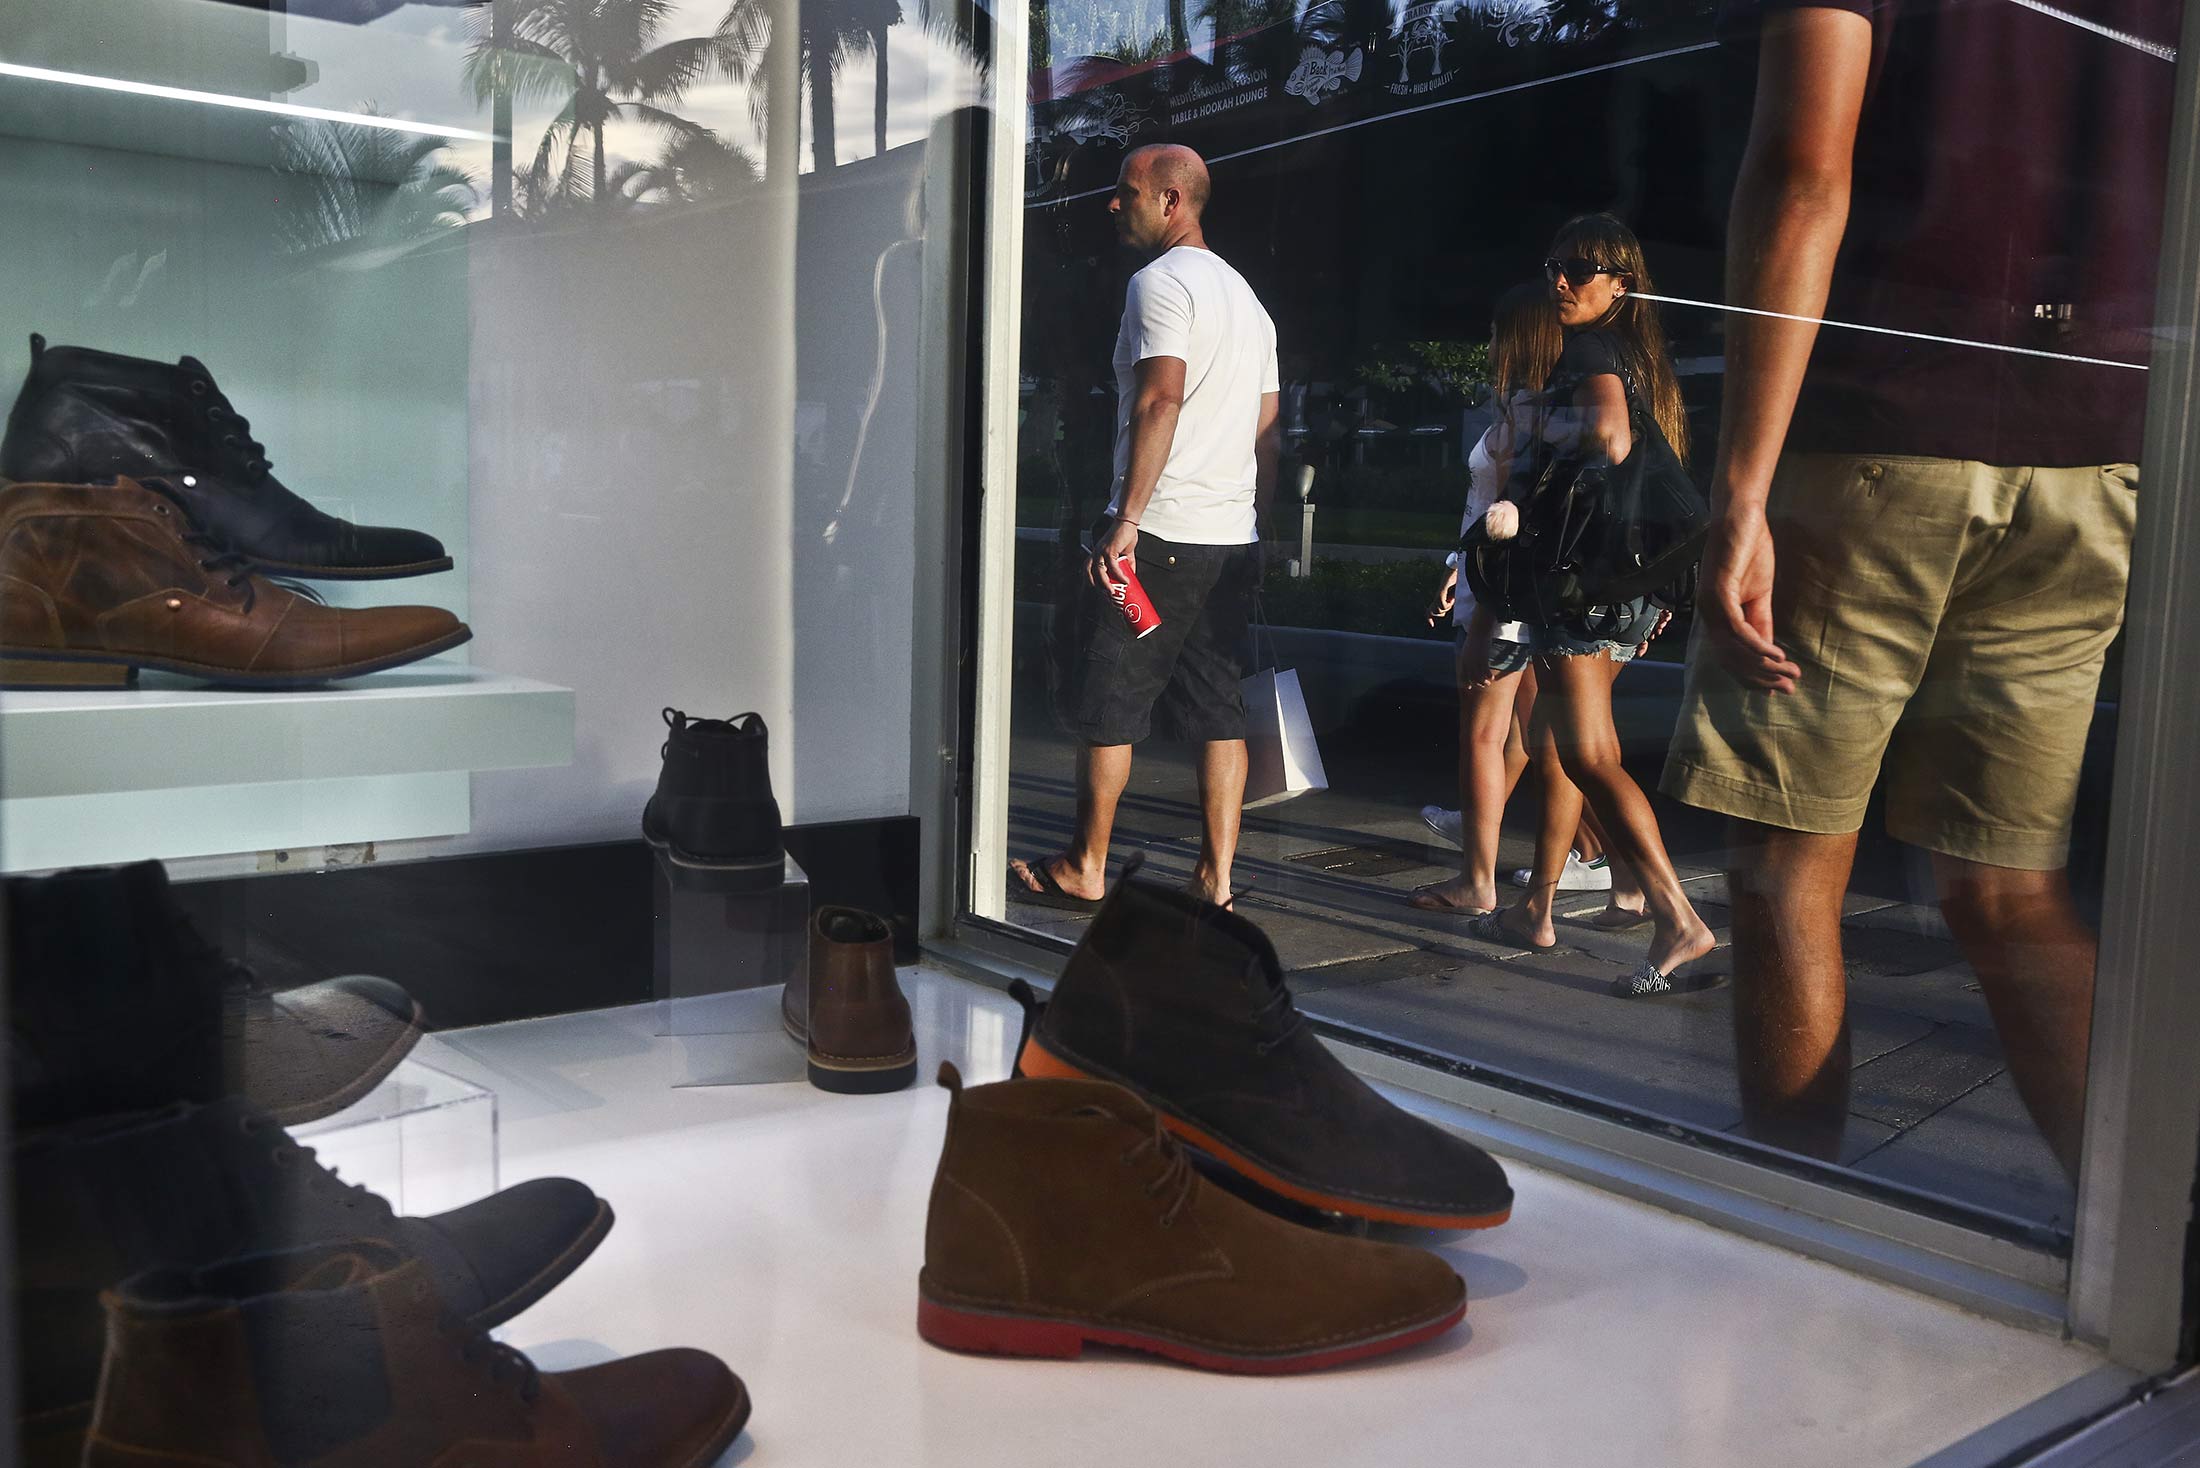 Shoppers and pedestrians pass in front of a store window displaying shoes for sale at the Lincoln Road Mall in Miami Beach, Florida, U.S., on Wednesday, Sept. 21, 2016. The Conference Board is scheduled to release consumer confidence data on Sept. 27.
